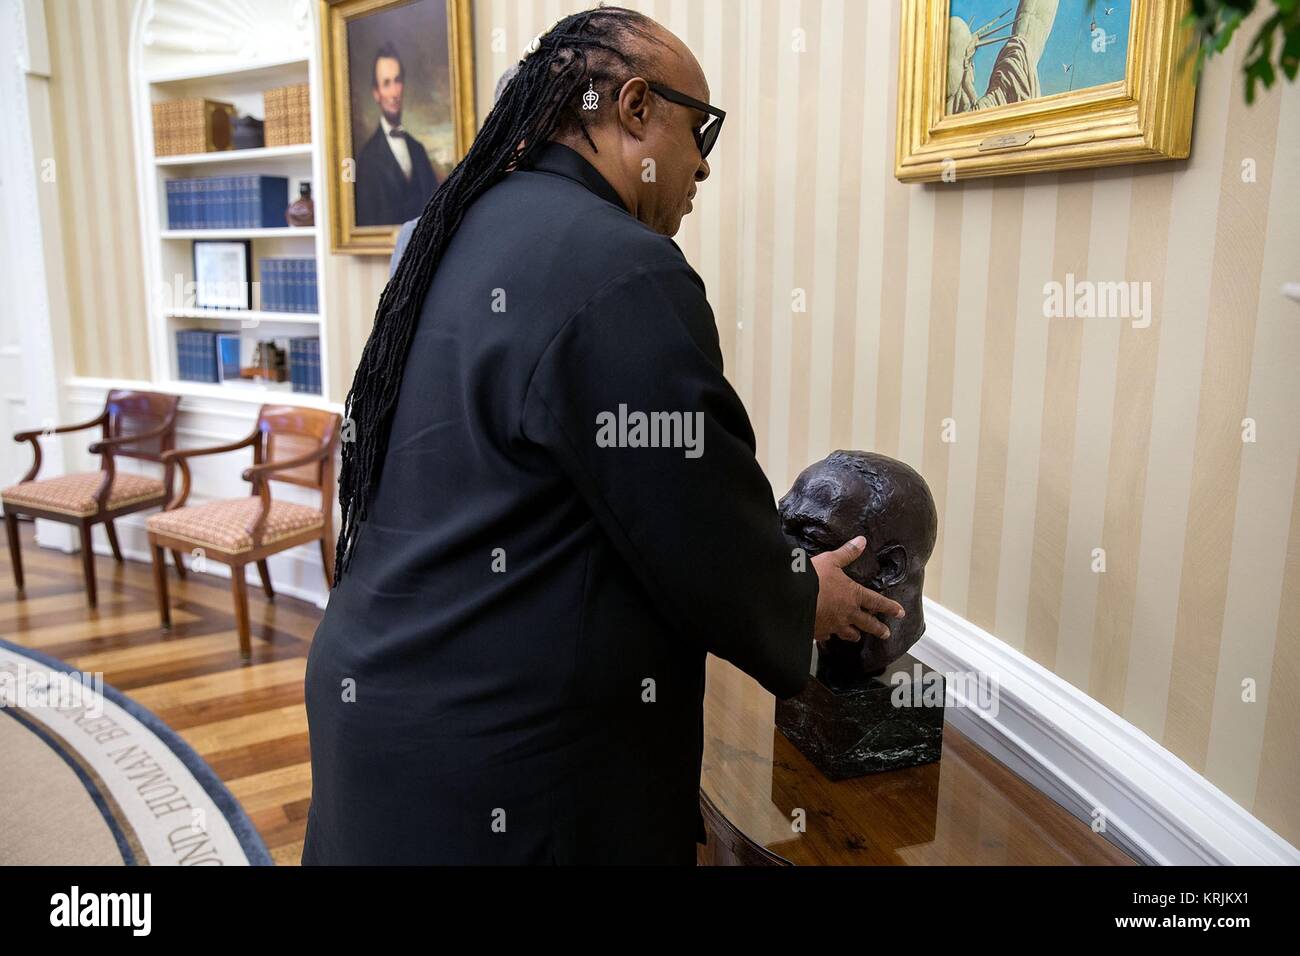 Singer Stevie Wonder feels the bust of Dr. Martin Luther King Jr. while visiting U.S. President Barack Obama in the White House Oval Office August 5, 2016 in Washington, DC. Stock Photo